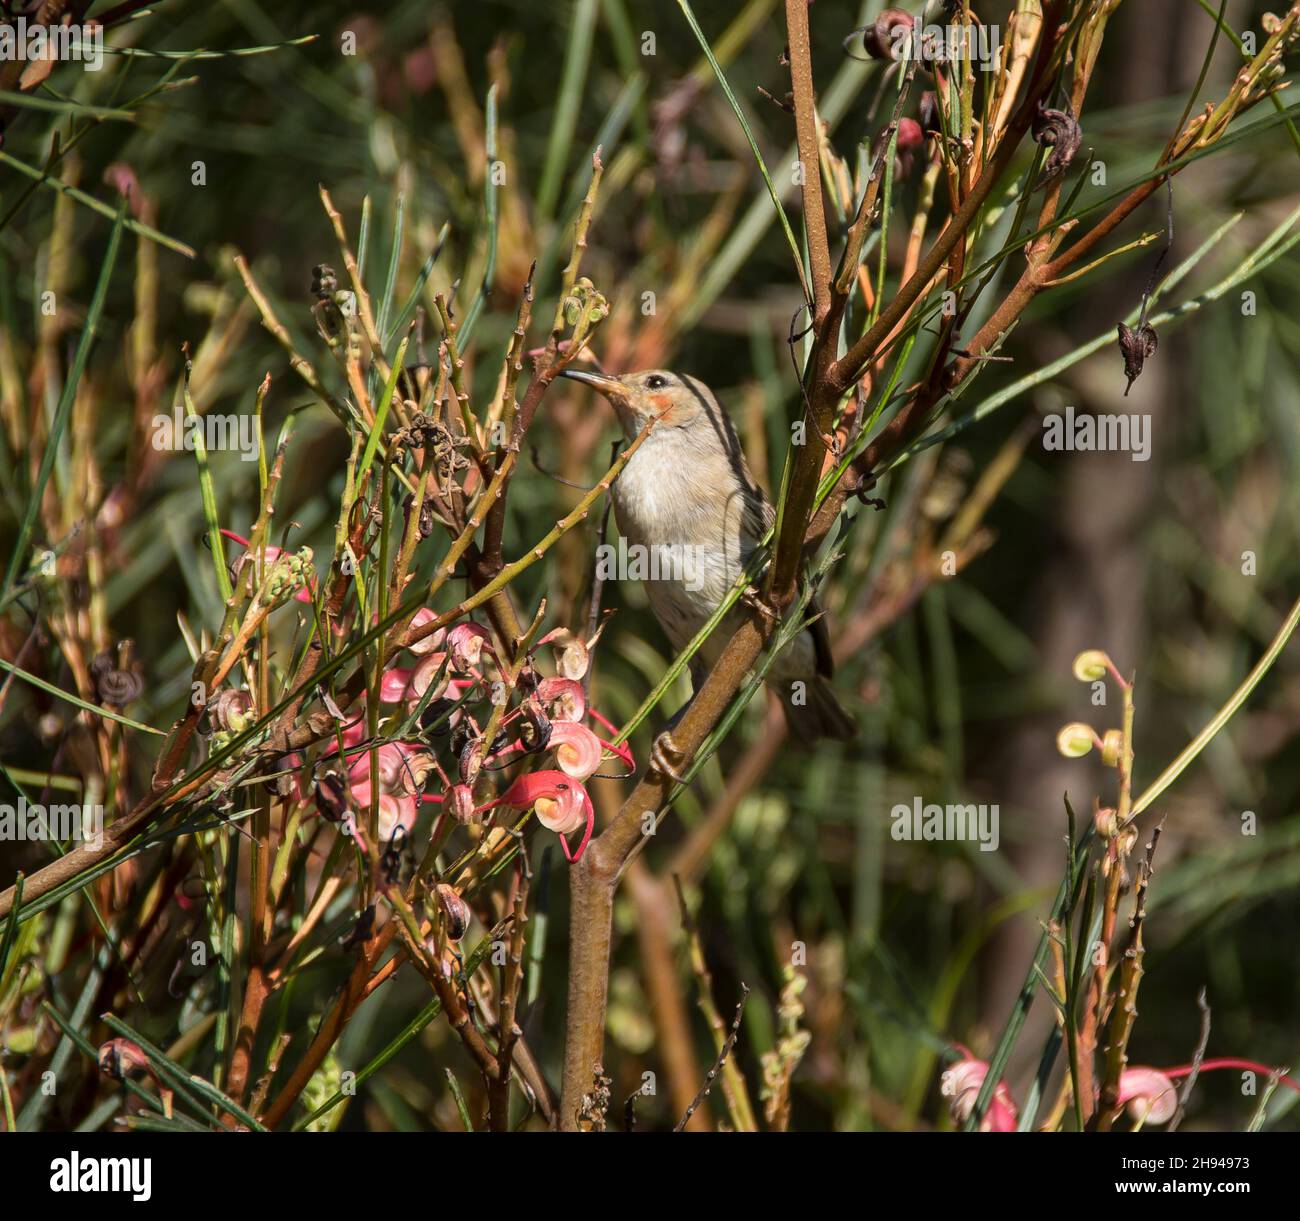 Tiny Australian female Scarlet Honeyeater, Myzomela sanguinolenta, perched in grevillea bush with pink flowers and green foliage. Queensland, spring. Stock Photo